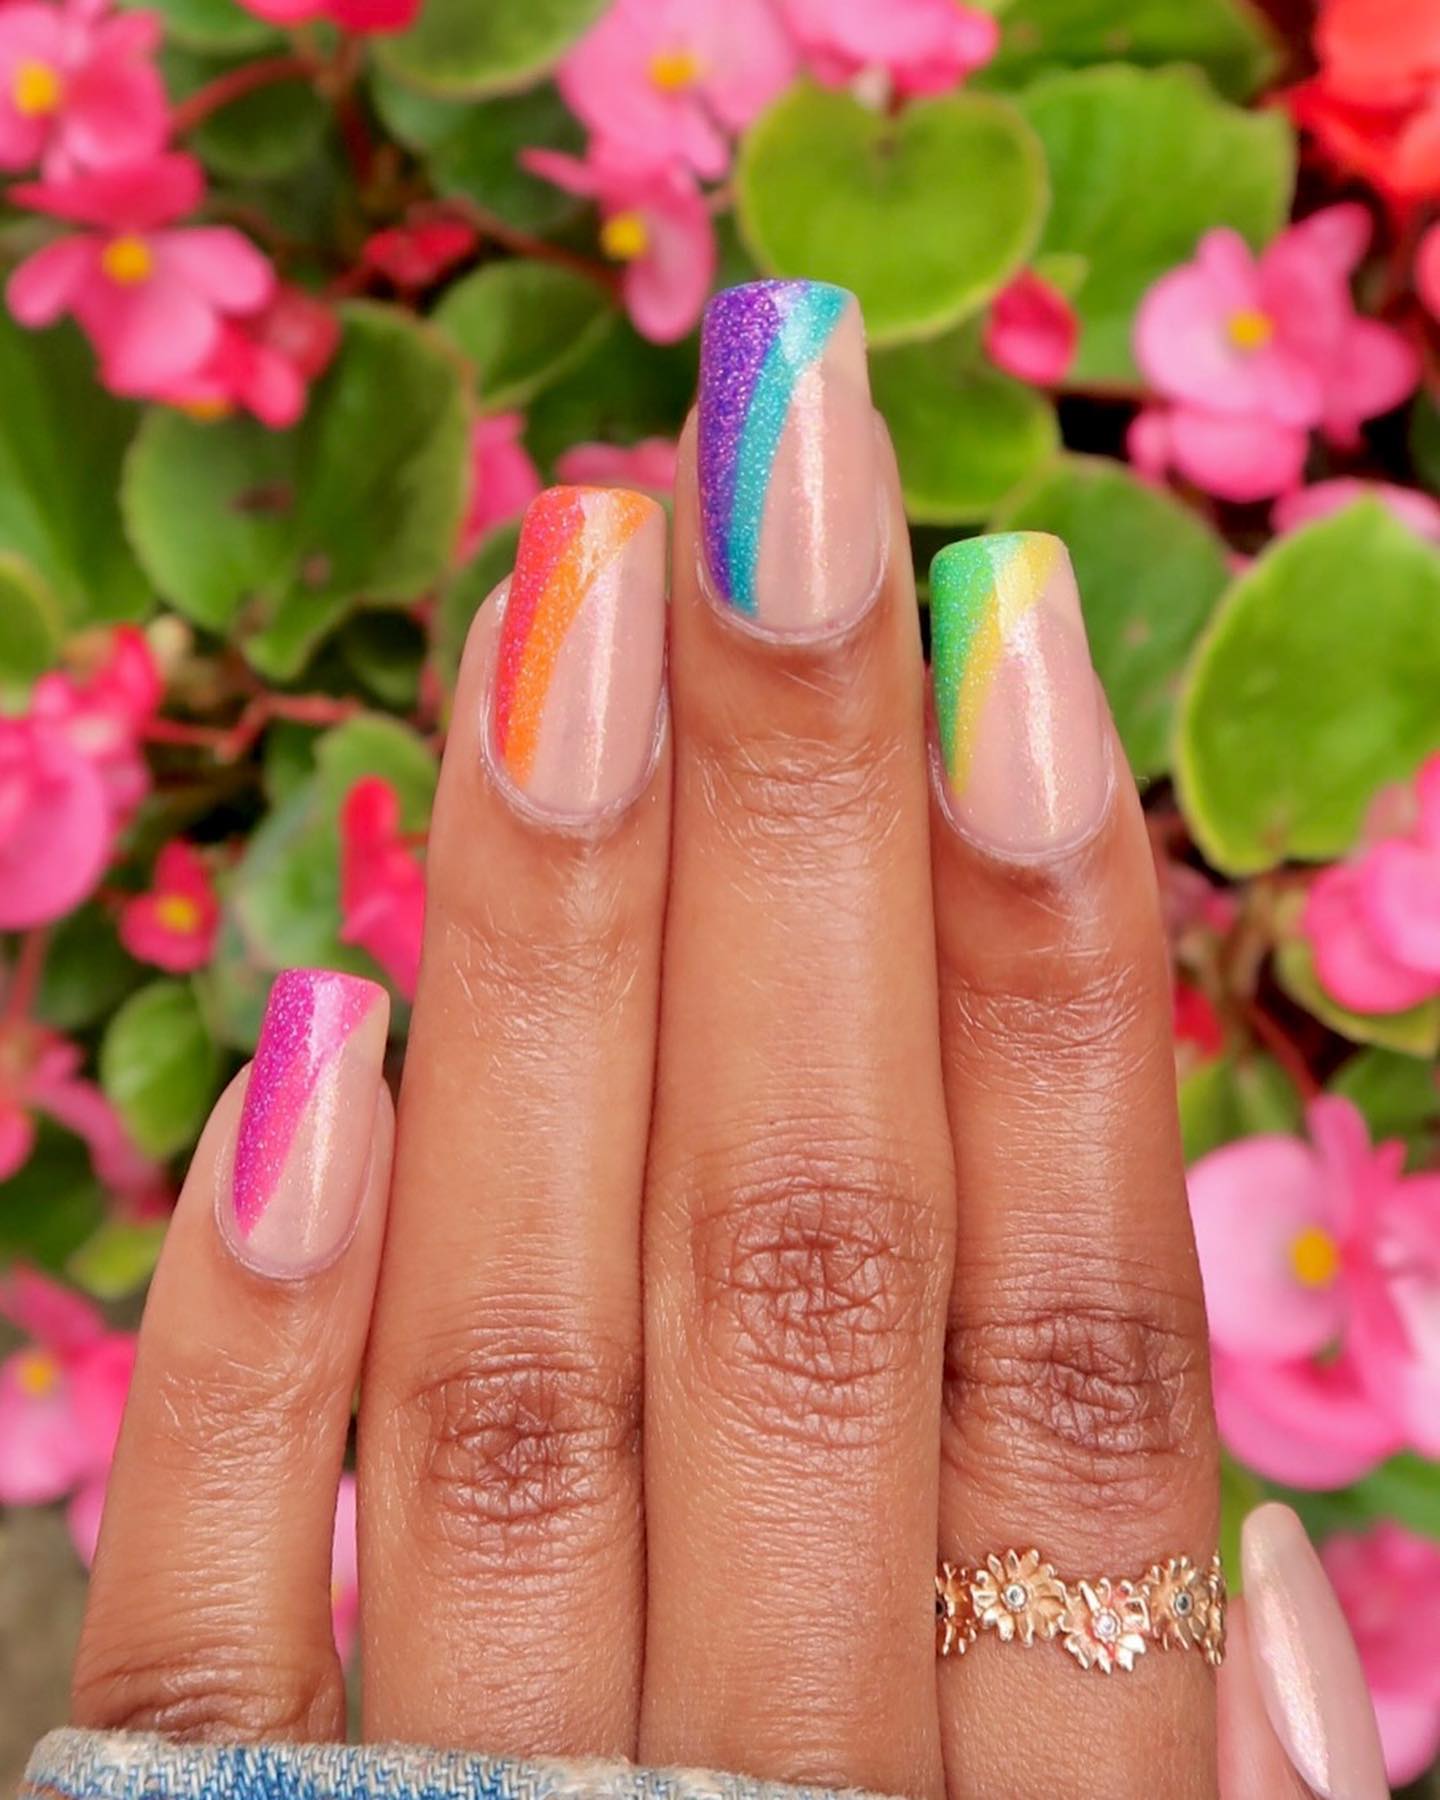 Polygel nail extensions - Everything you need to know